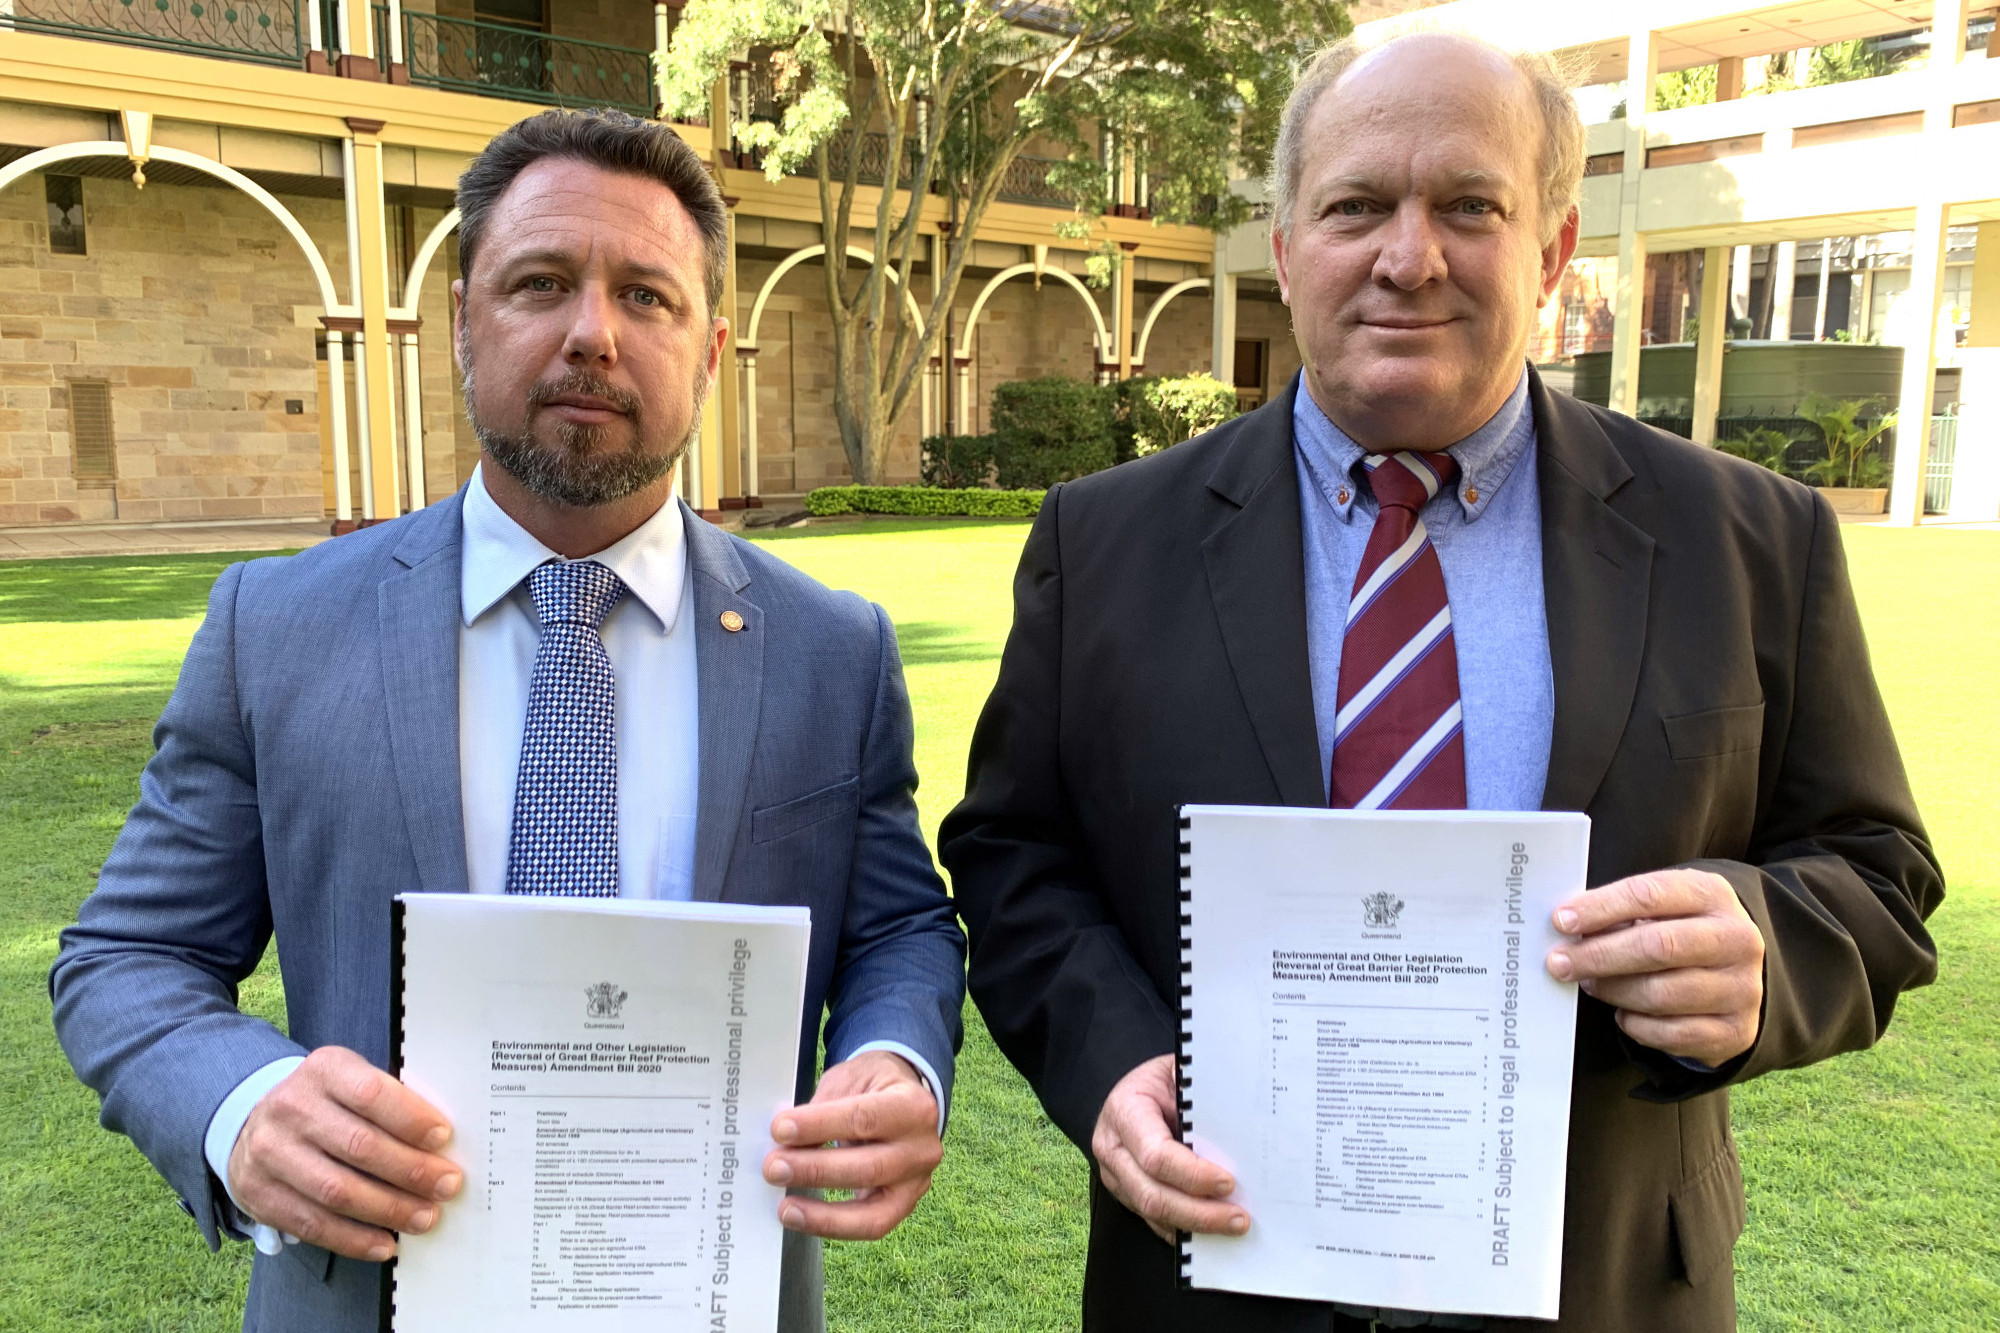 Members for Hinchinbrook and Hill, Nick Dametto and Shane Knuth with the Private Members Bill prepared in readiness for tabling in the next Parliamentary Term in Queensland.